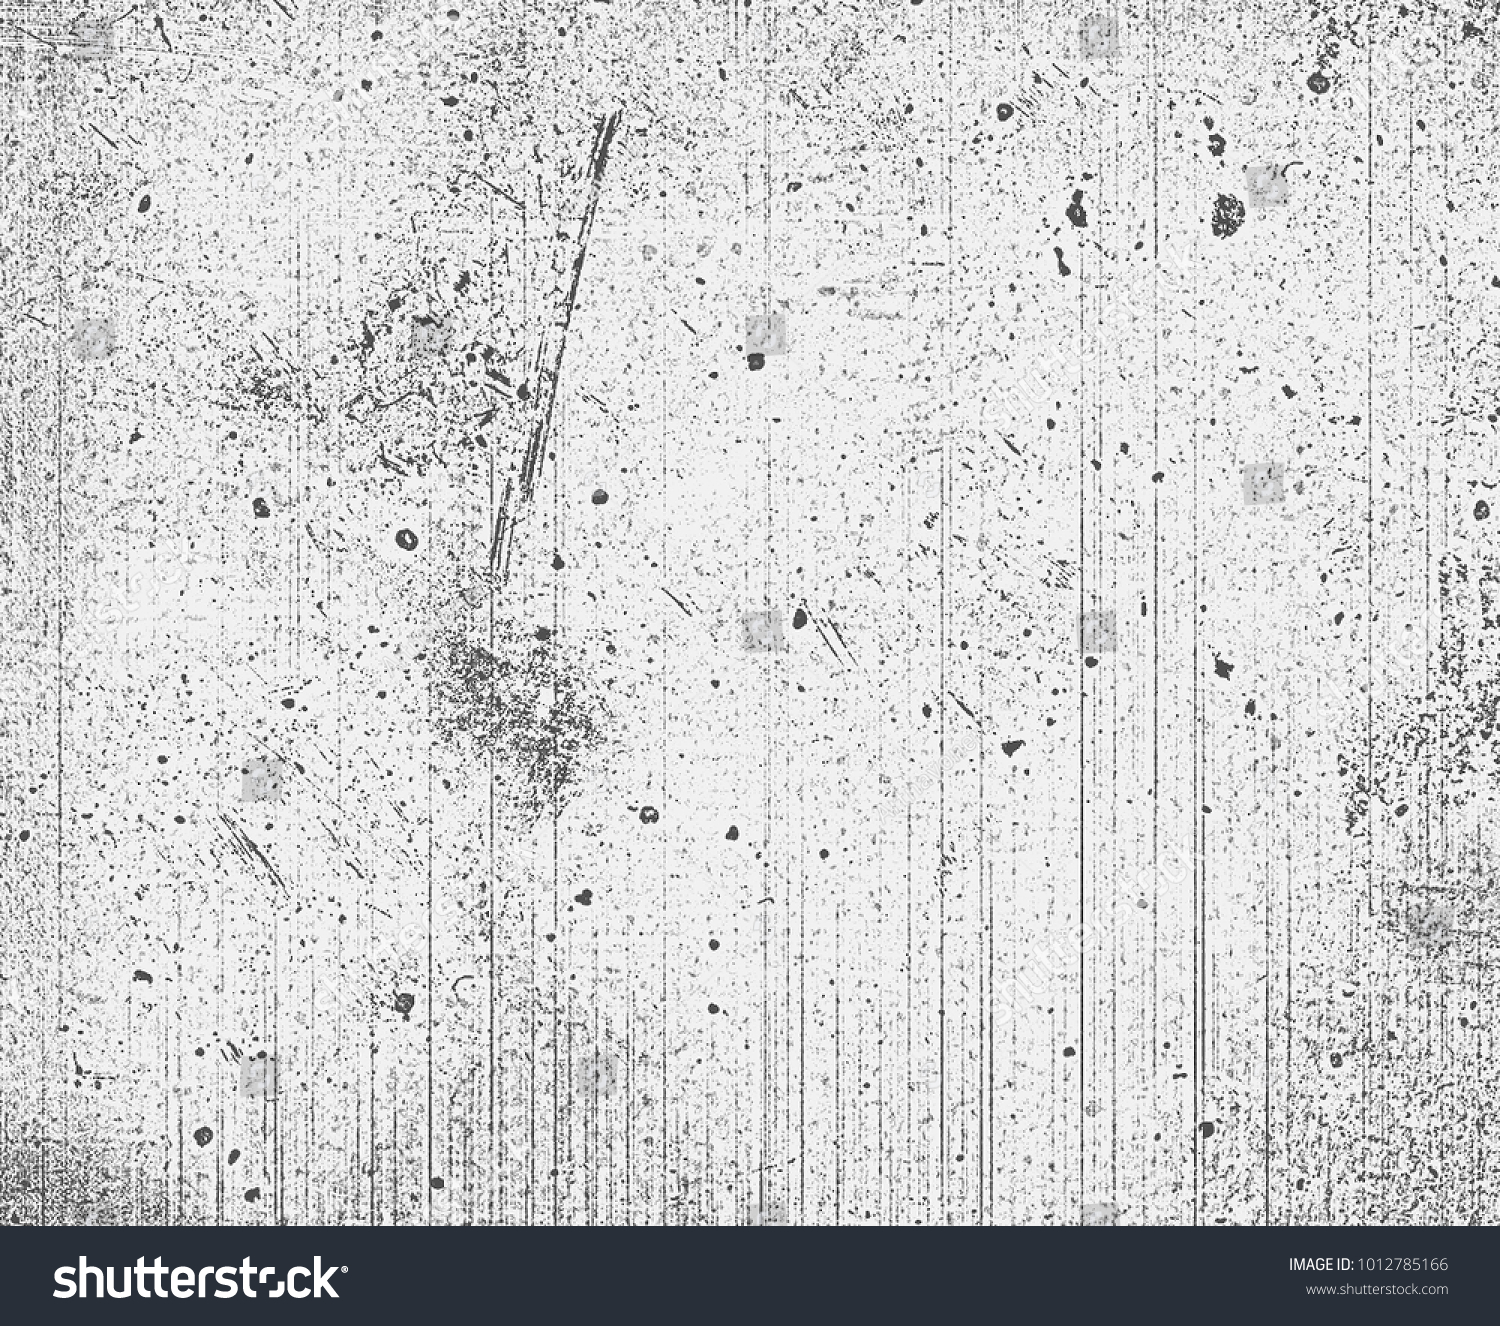 Abstract Distressed Grunge Wall Texture Background Stock ...